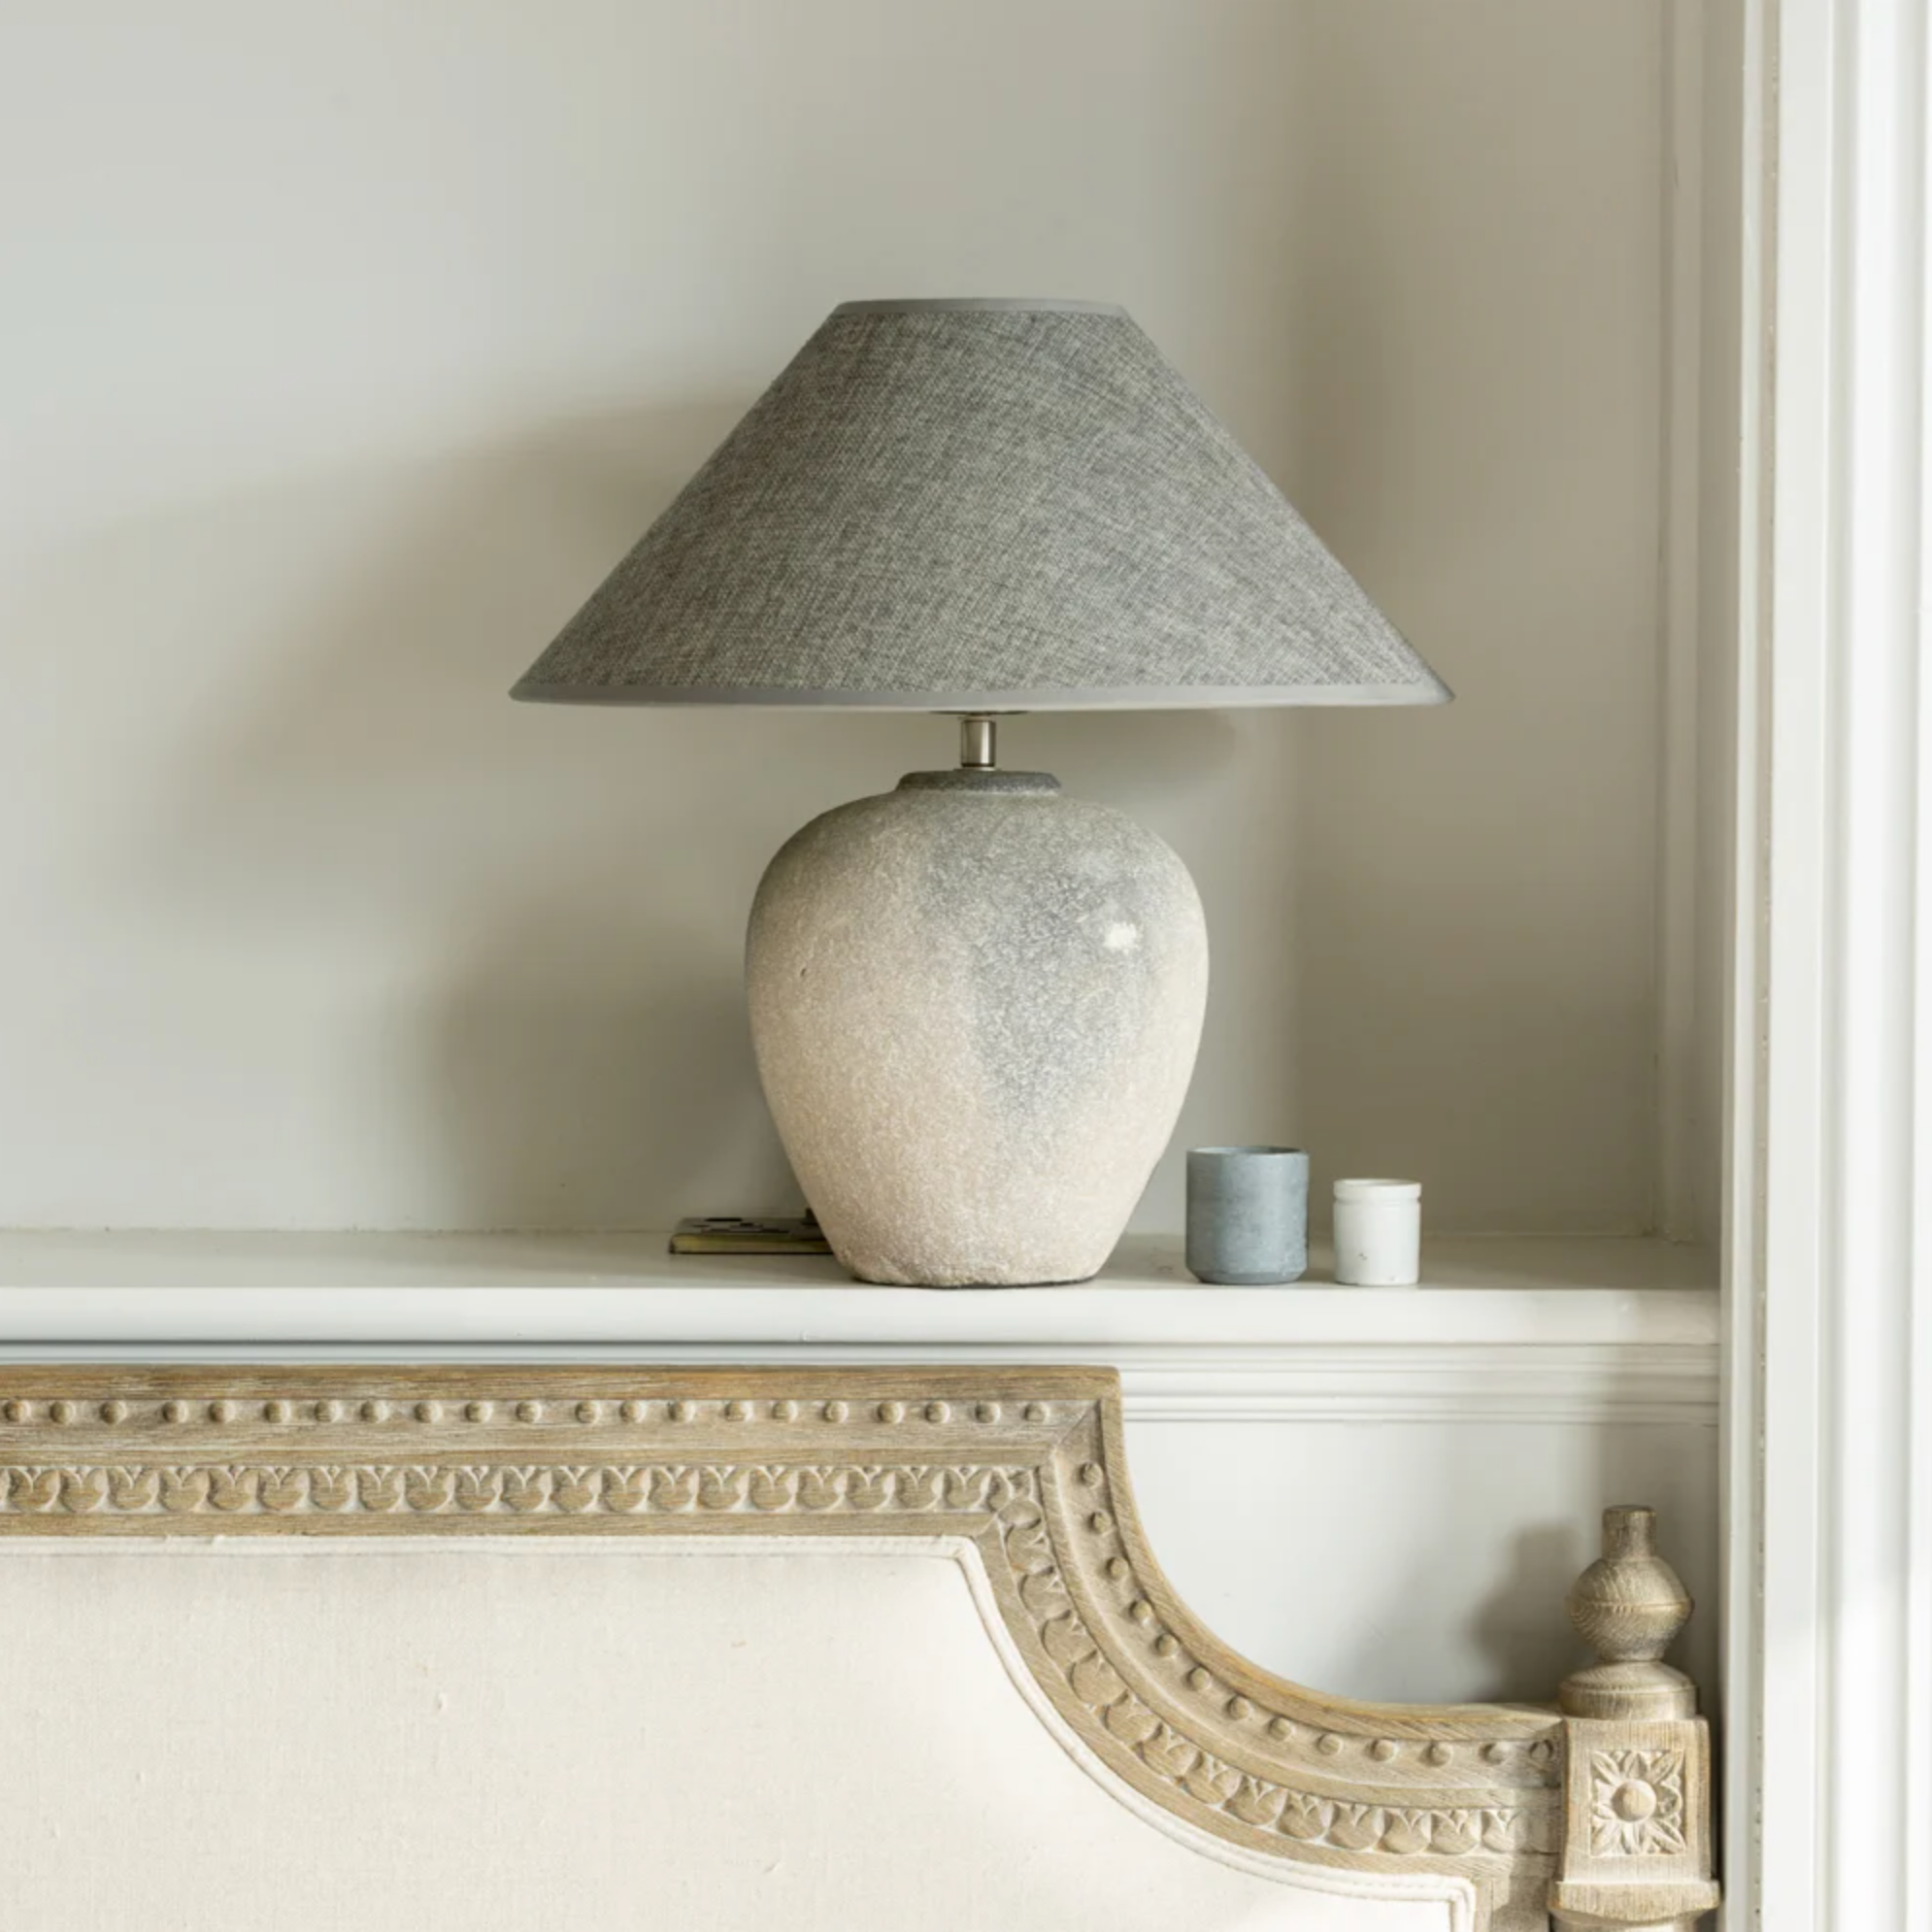 Stone coloured Ceramic Lamp with grey Shade on a shelf in a bedroom.